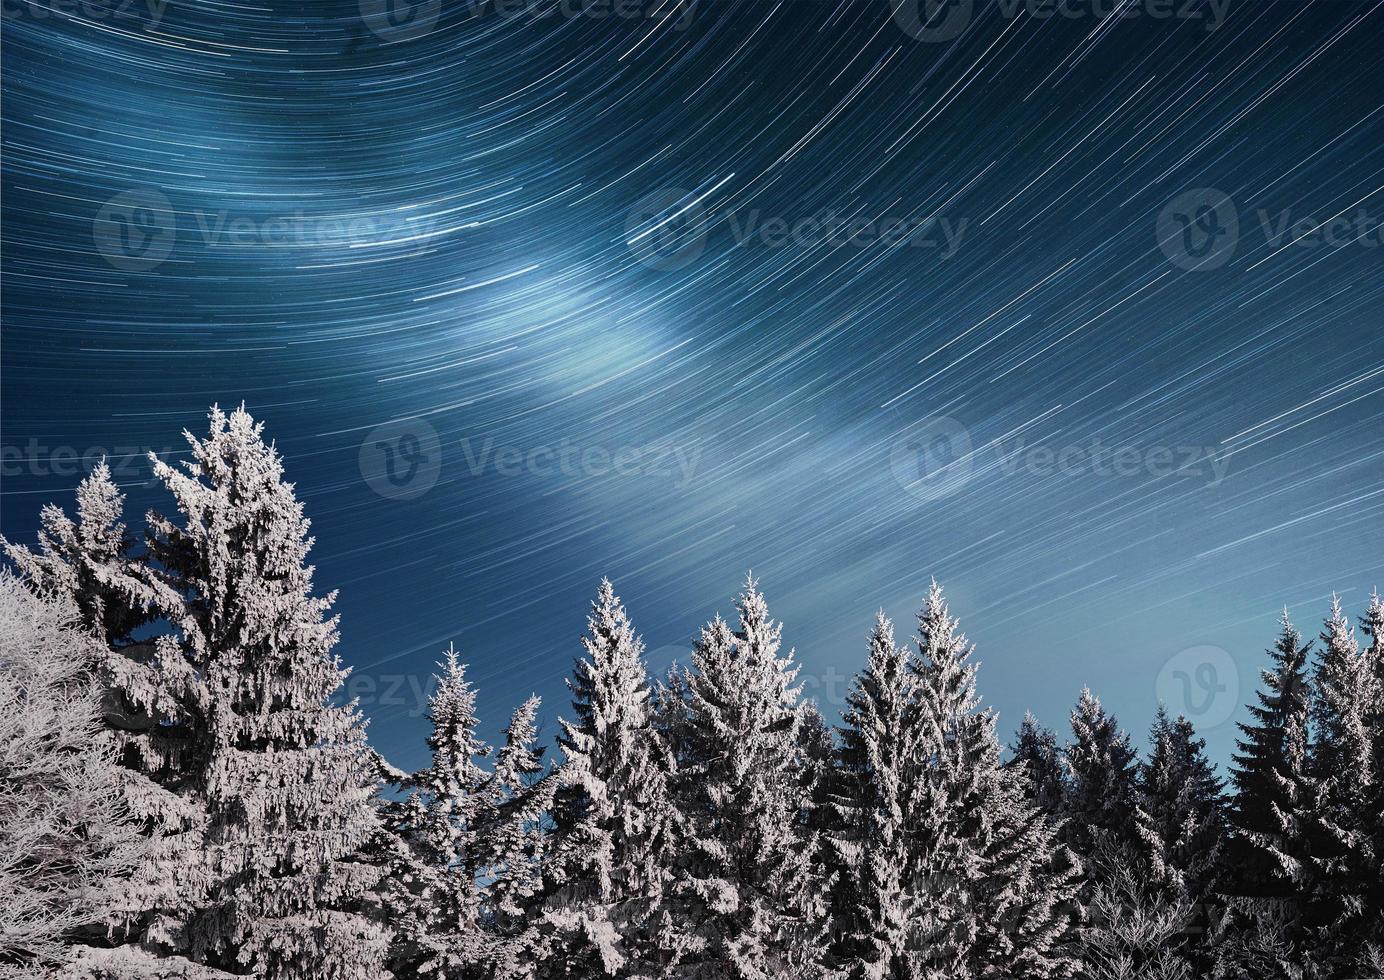 magical winter snow covered tree. Winter landscape. Vibrant night sky with stars and nebula and galaxy. Deep sky astrophoto photo